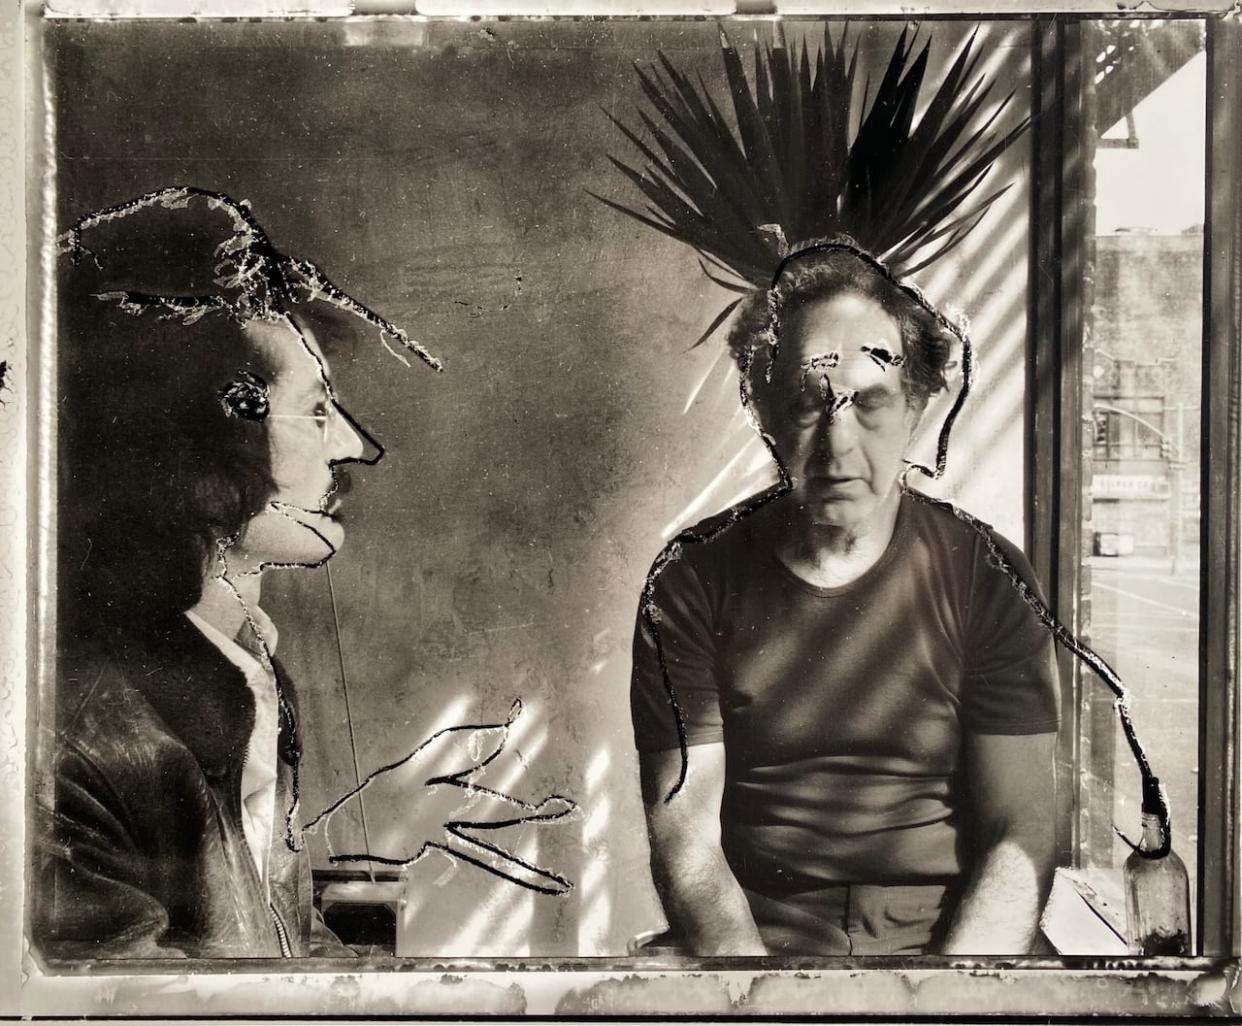 A self-portrait Brian Graham, left, took with Robert Frank that’s included in his new book. Frank wasn’t happy with it, so he later scratched the negative. (Brian Graham - image credit)